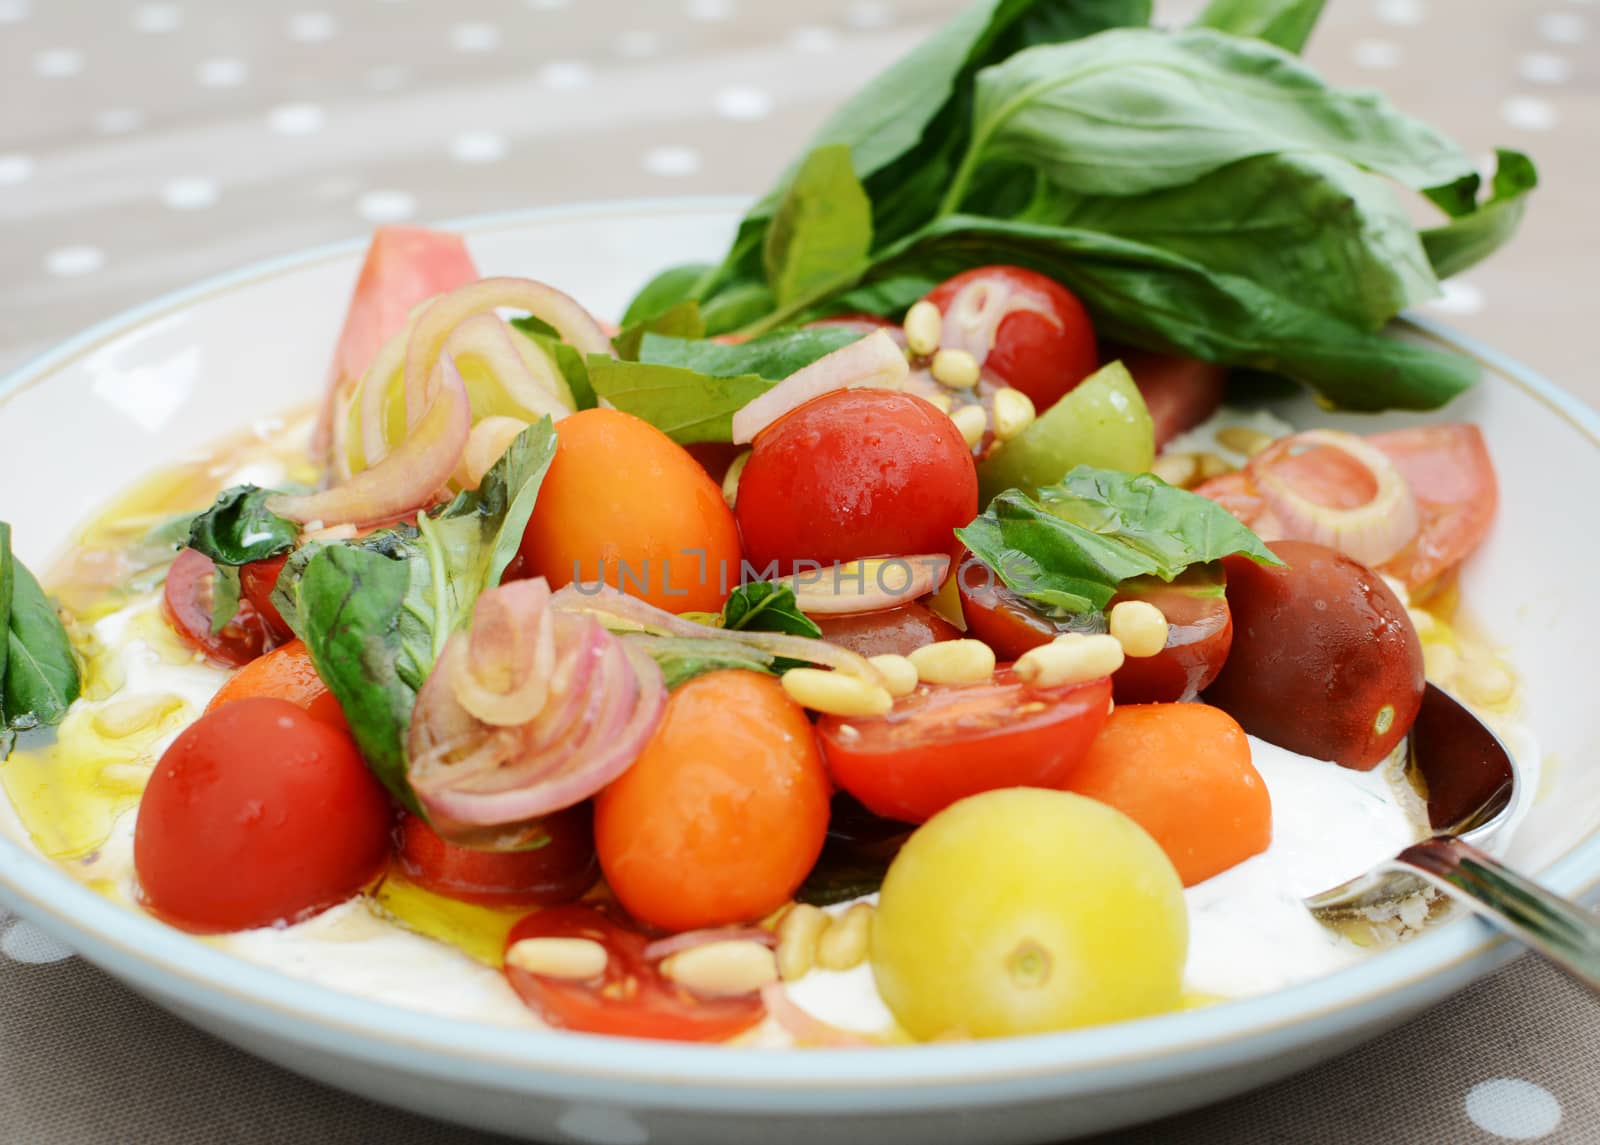 Mixed tomato salad with colourful cherry tomatoes, pine nuts and basil leaves, dressed with mascarpone and olive oil